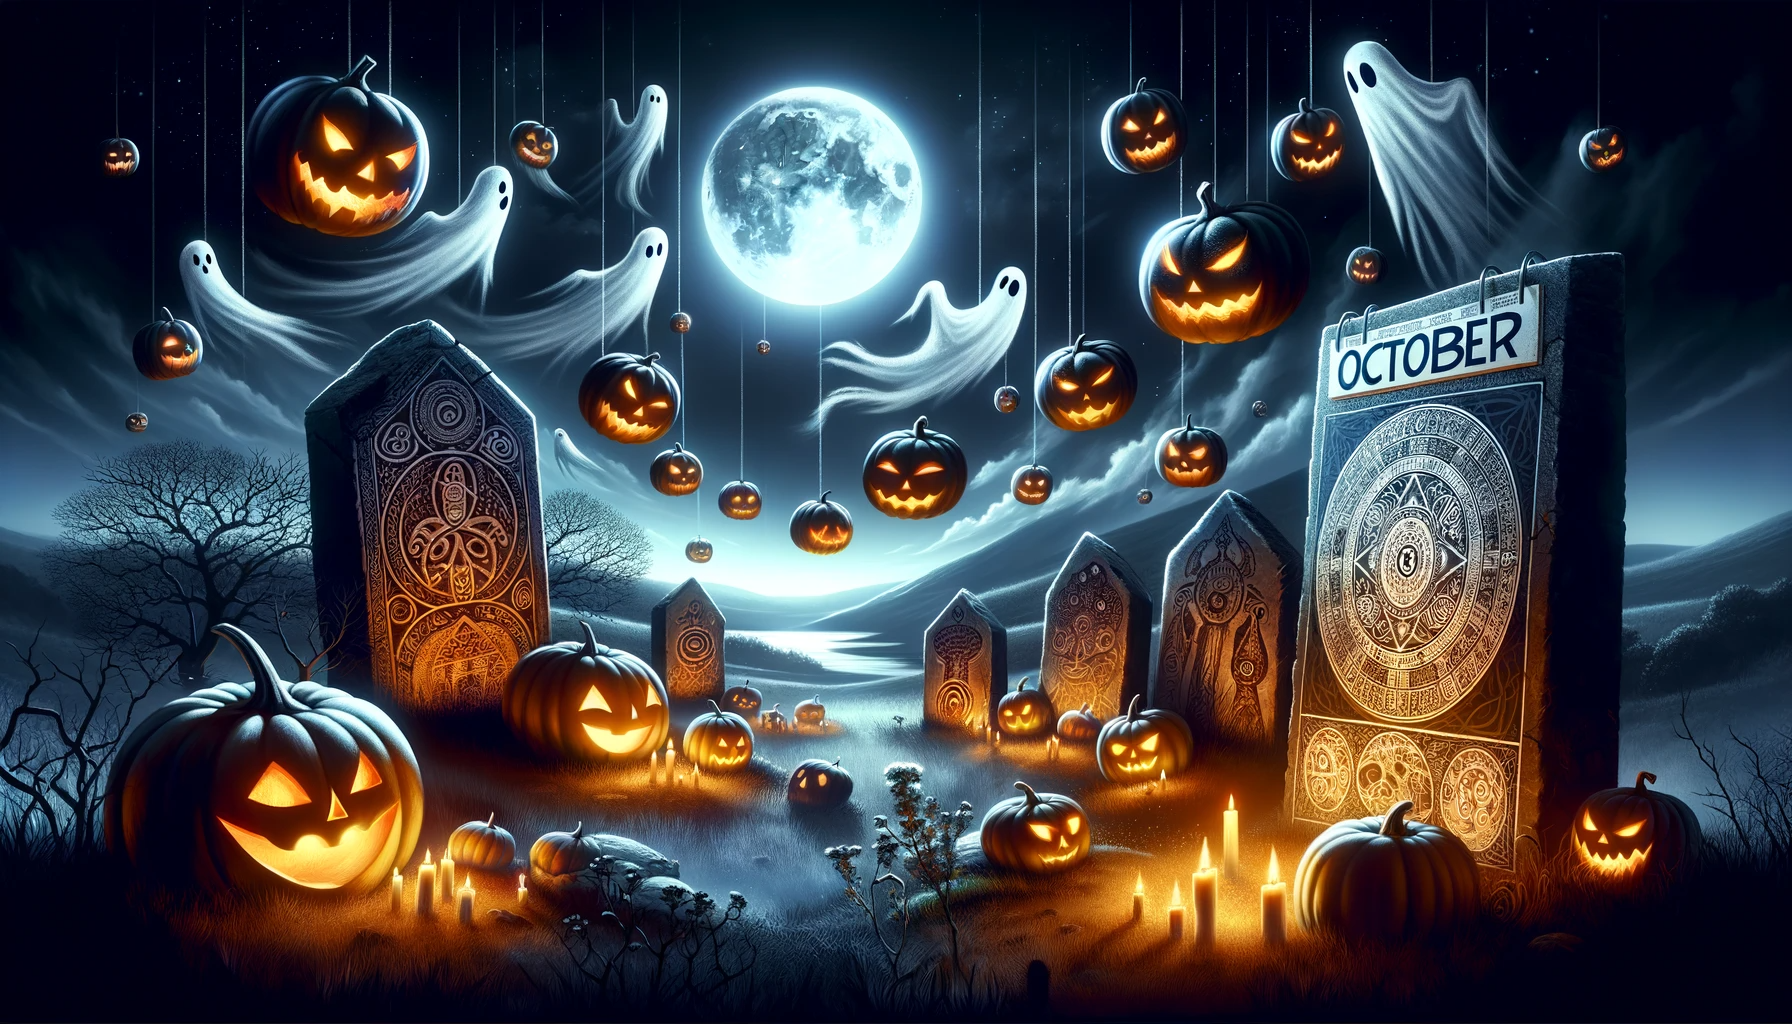 "Happy Halloween", by Marcel Gagné, created using DALL-E 3